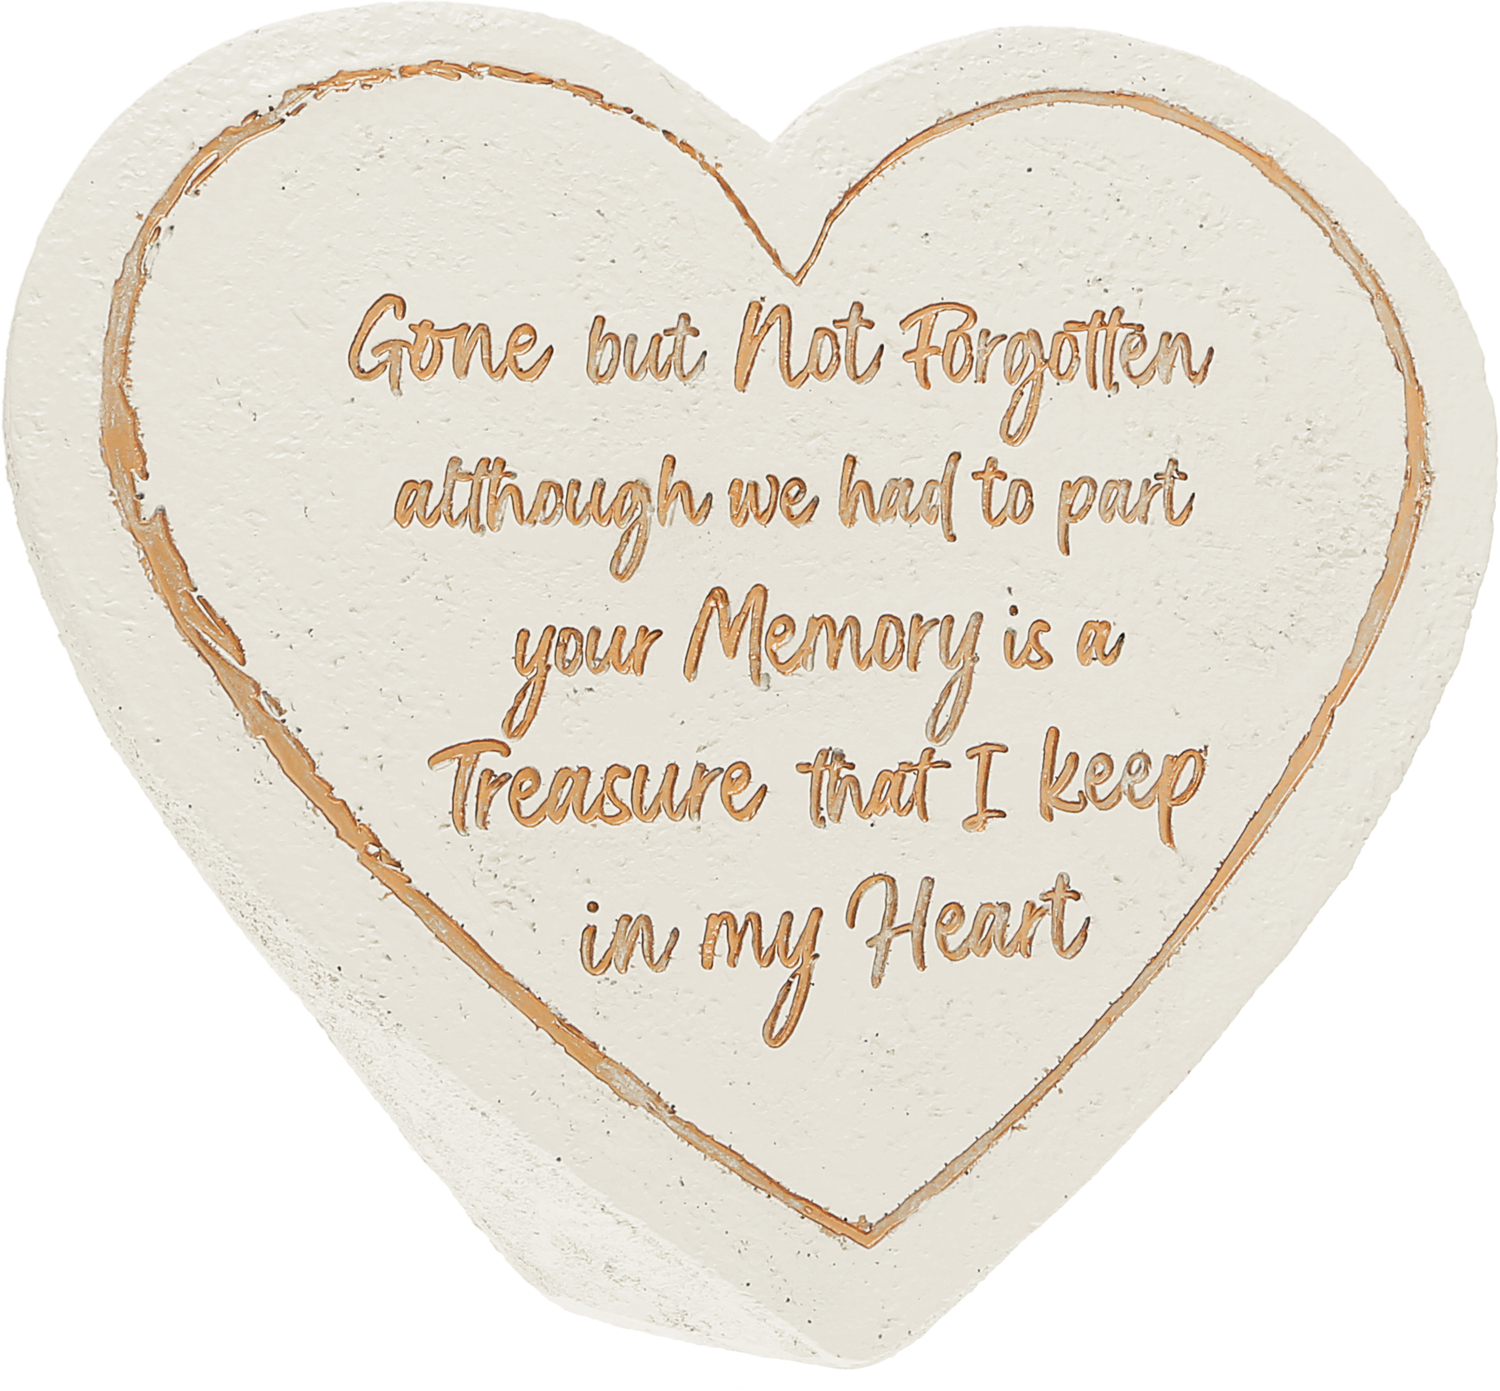 Not Forgotten by Forever in our Hearts - Not Forgotten - 5" Heart Memorial Stone